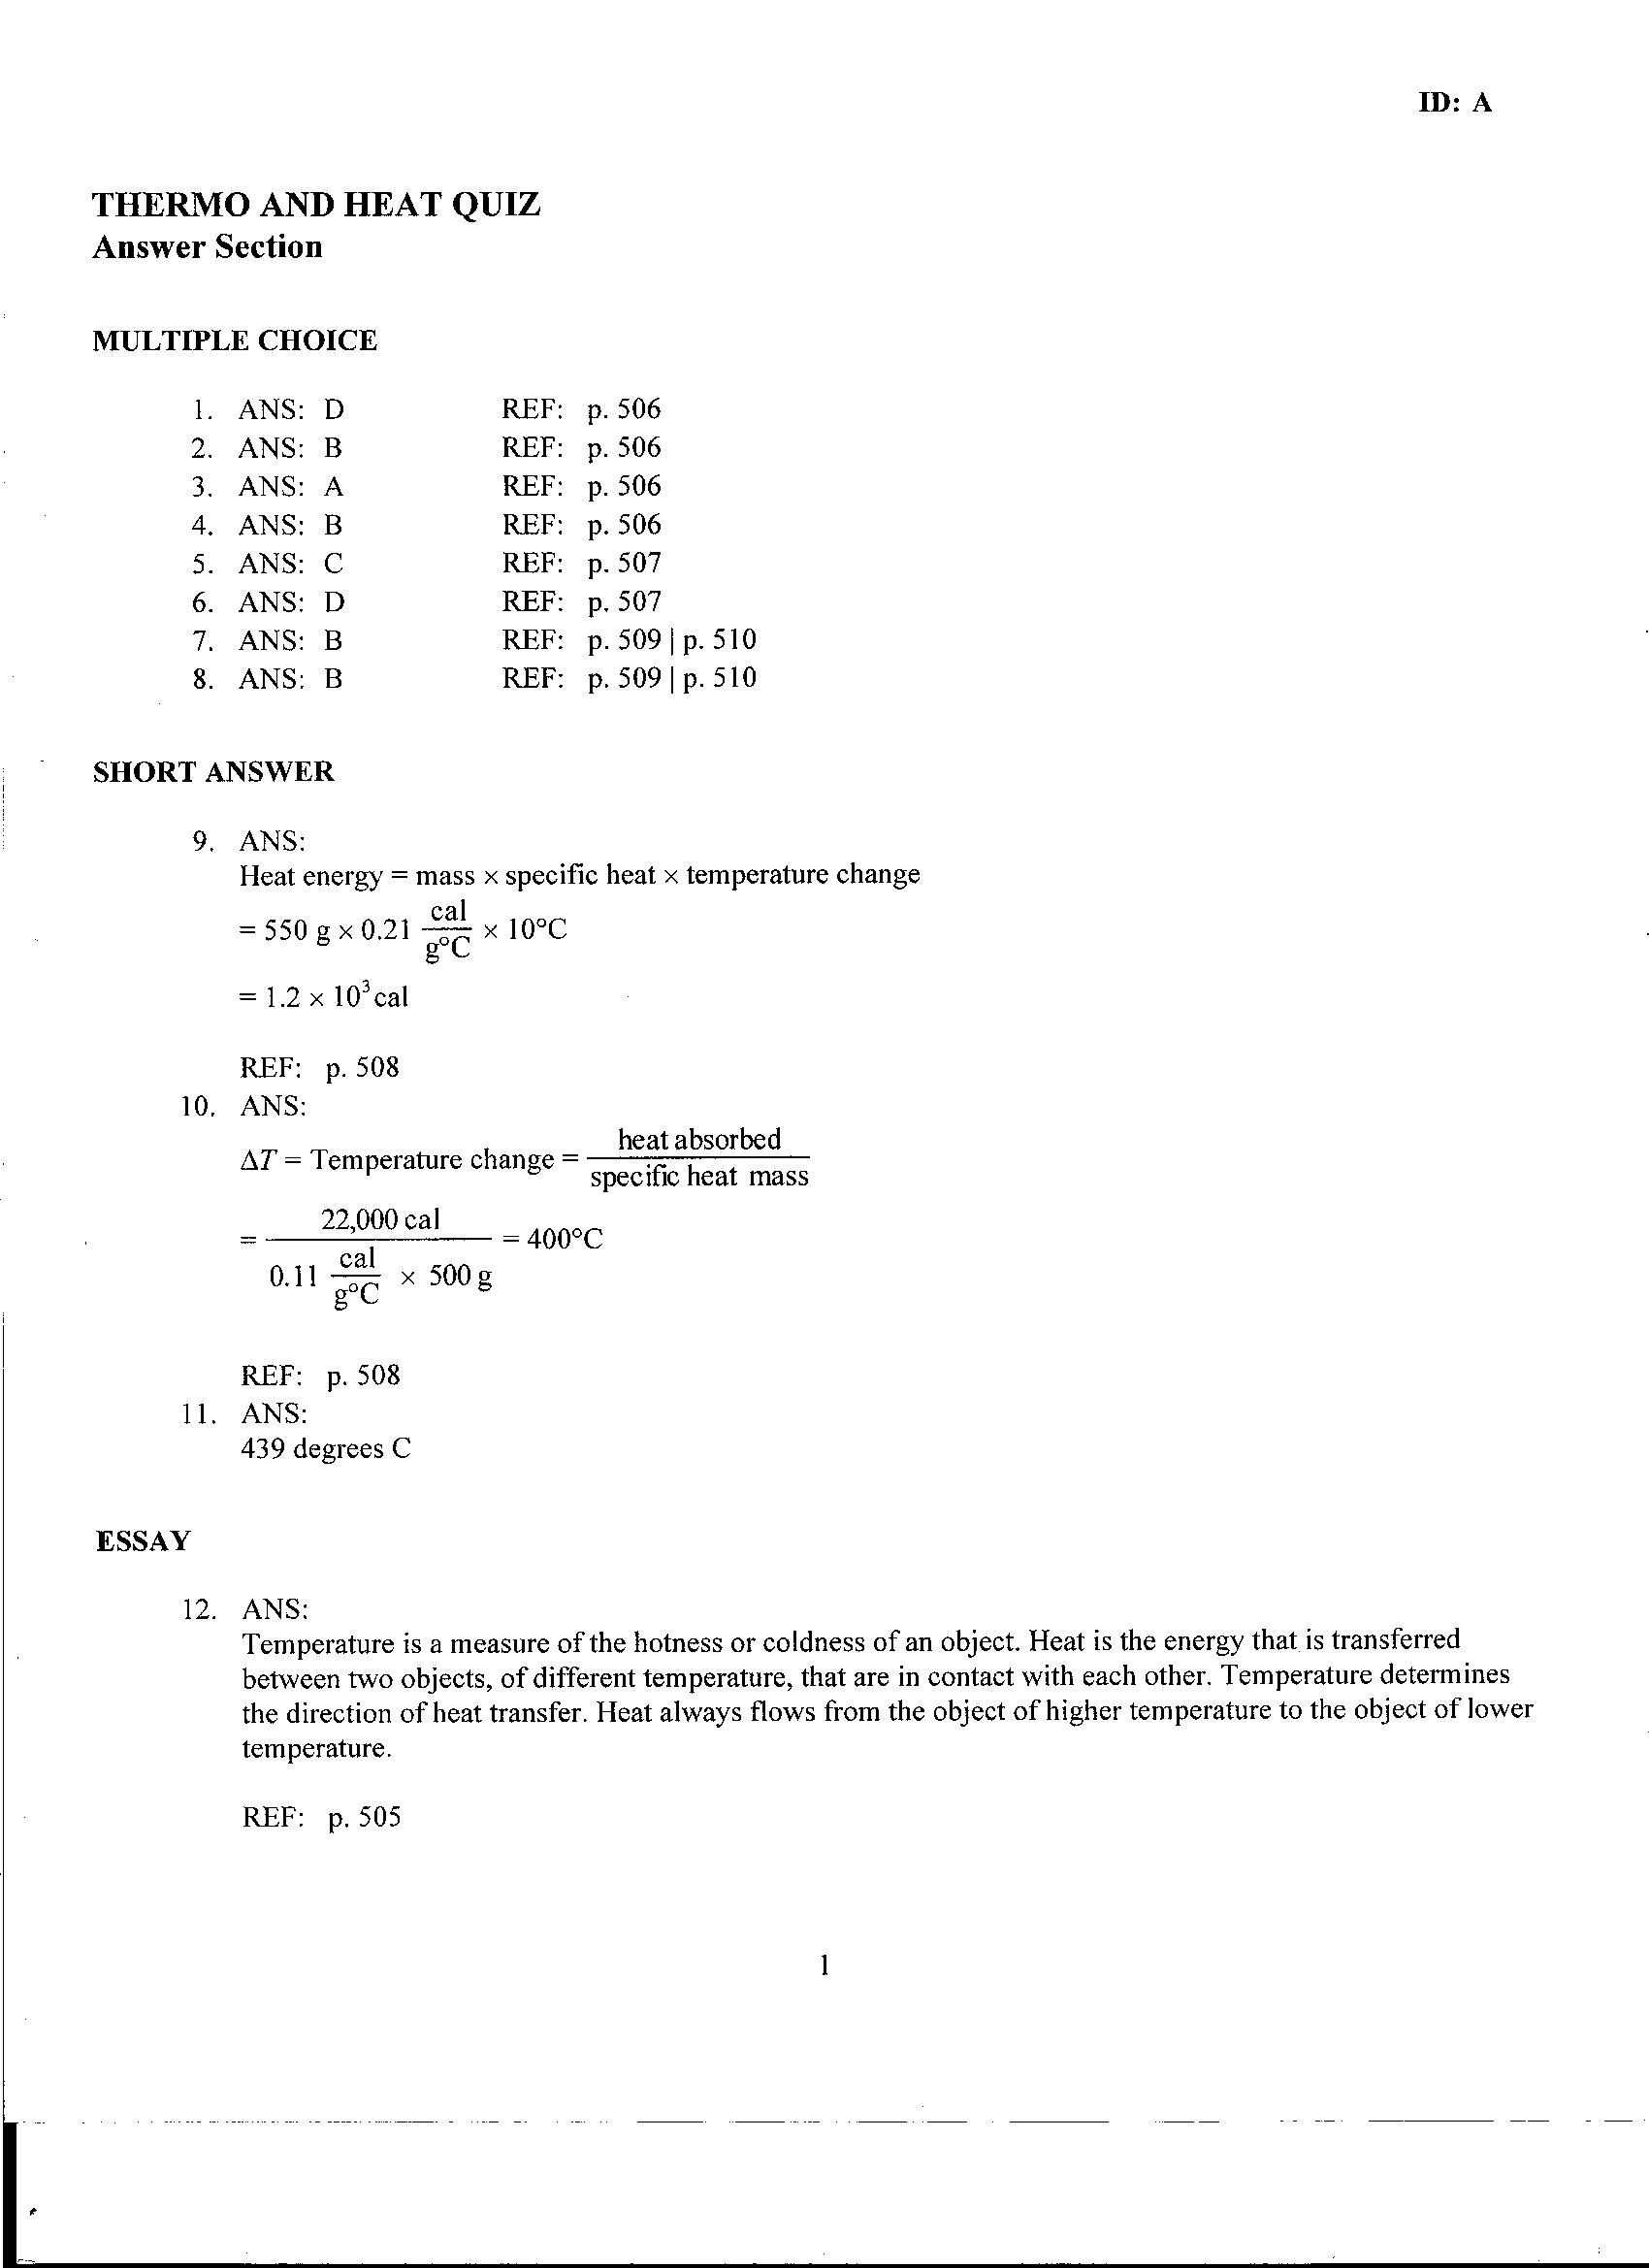 Heat Transfer Worksheet Pdf or Periodic Table Packet 1 New Foothill High School Revitabeau